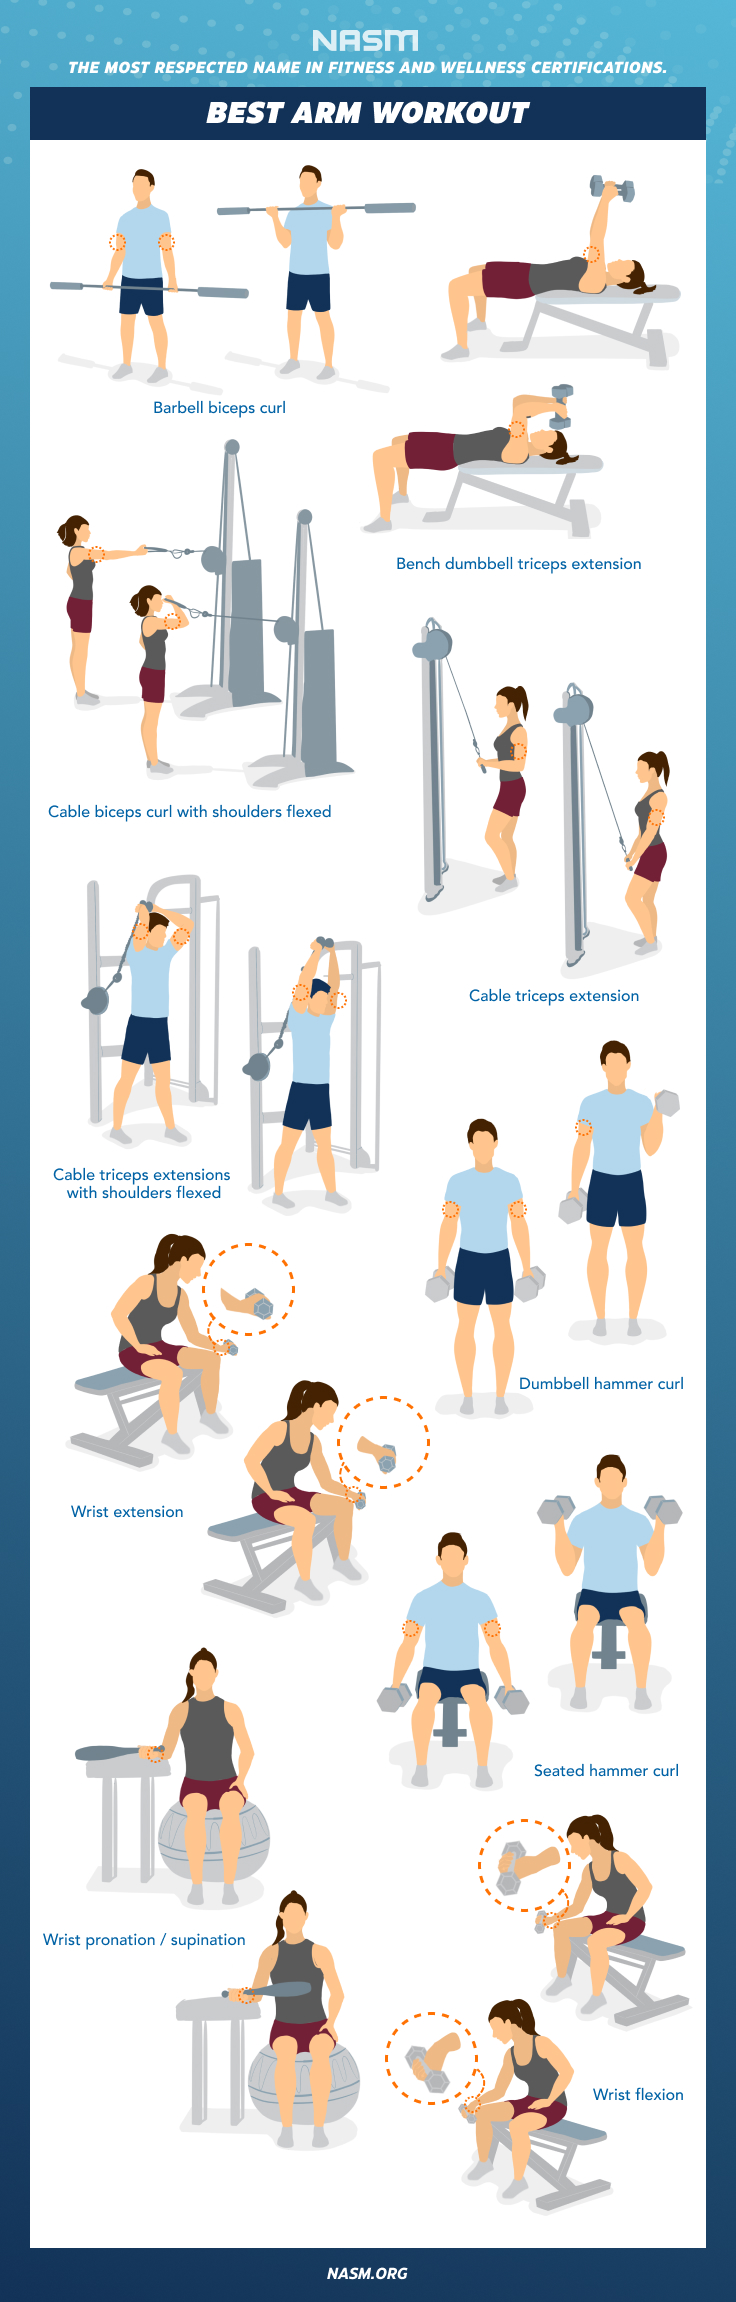 Upper Body Workout - Learn The Best Upper Body Exercises To Do At Home on